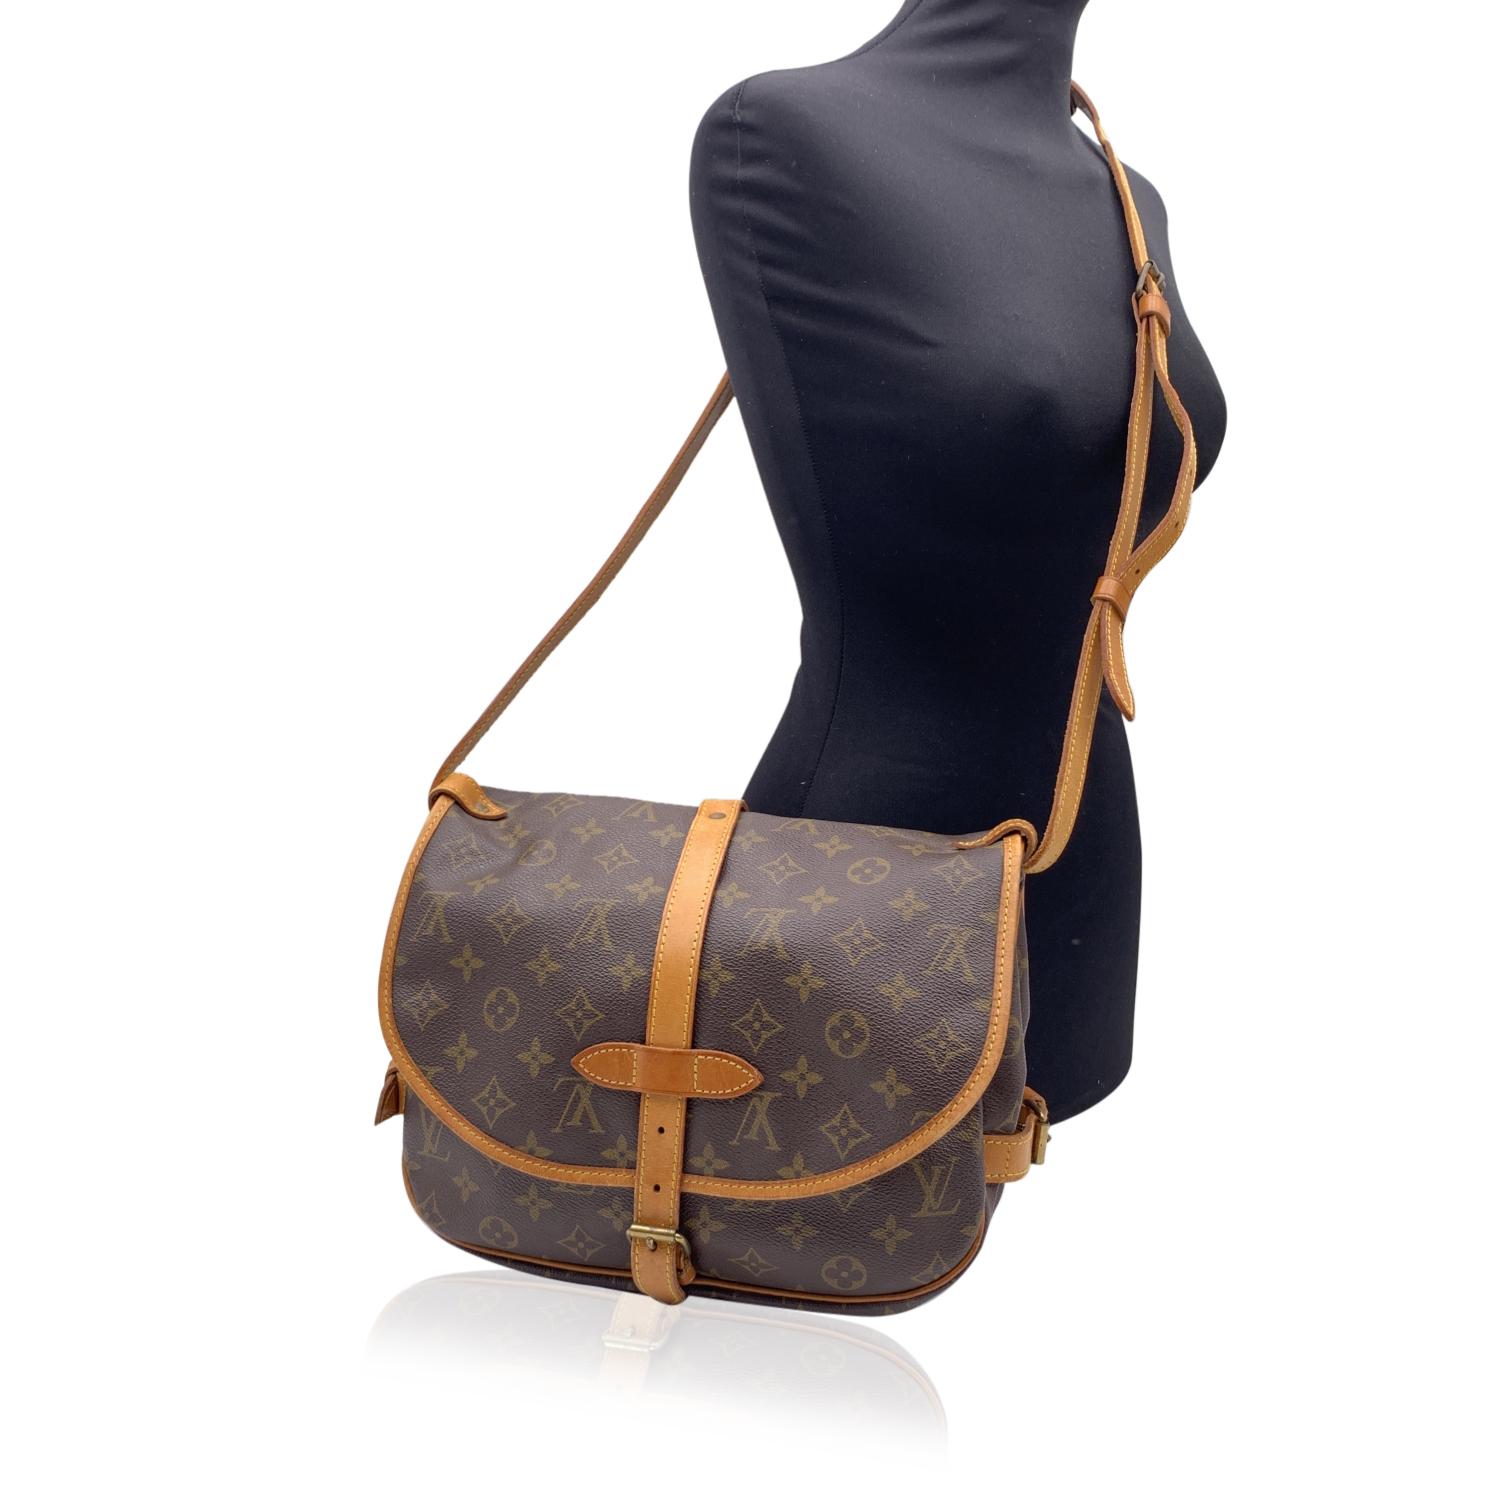 LOUIS VUITTON 'Saumur 30' inspired by equestrian 'SADDLE' bag. The legendary SAUMUR features dual front compartments, held tightly together at the sides with belt-like tabs. Adjustable long shoulder strap with pad for added comfort. Monogram canvas